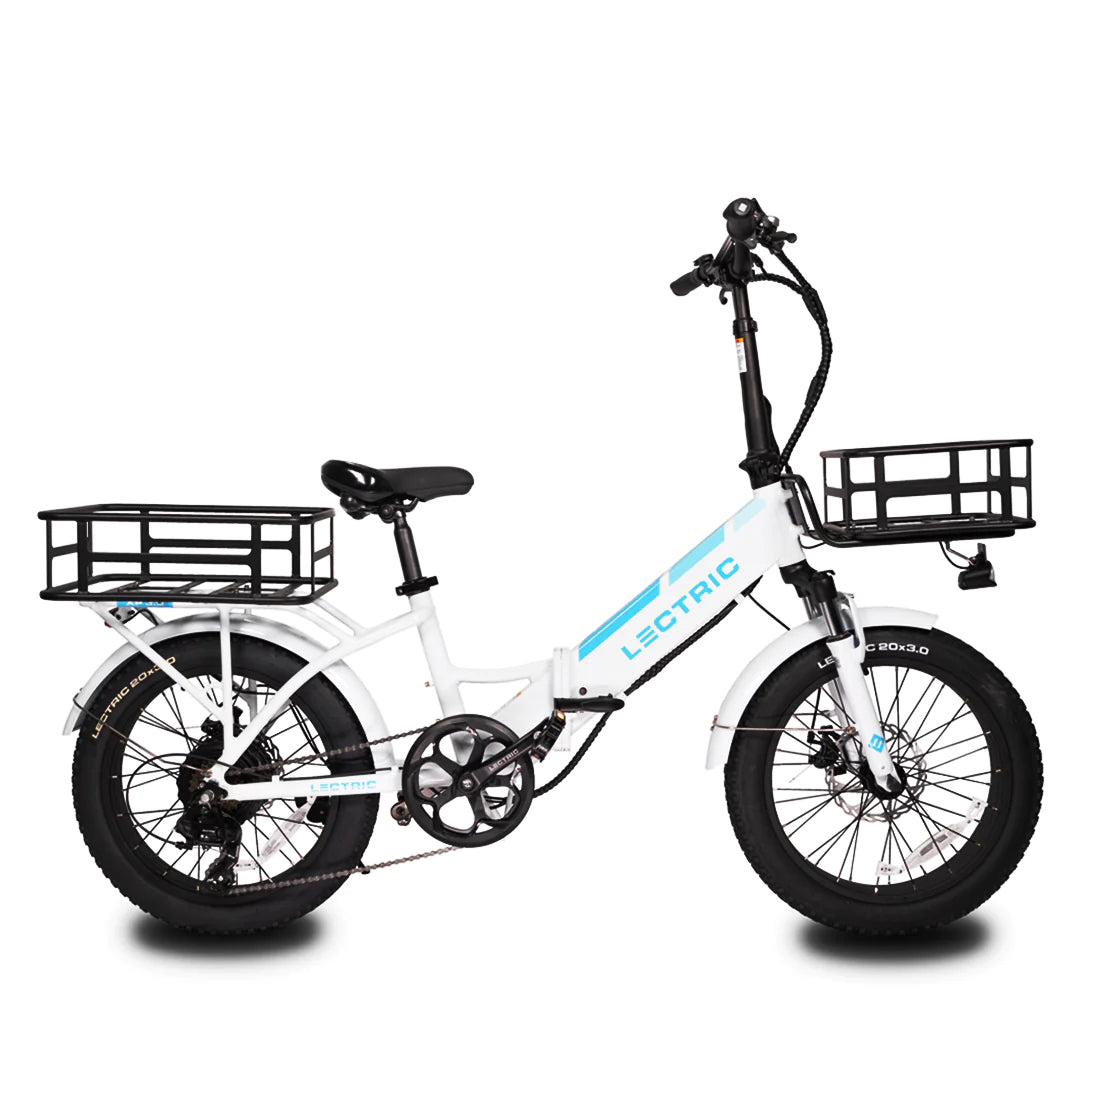 Lectric 2.0 Folding bike ***instore only****